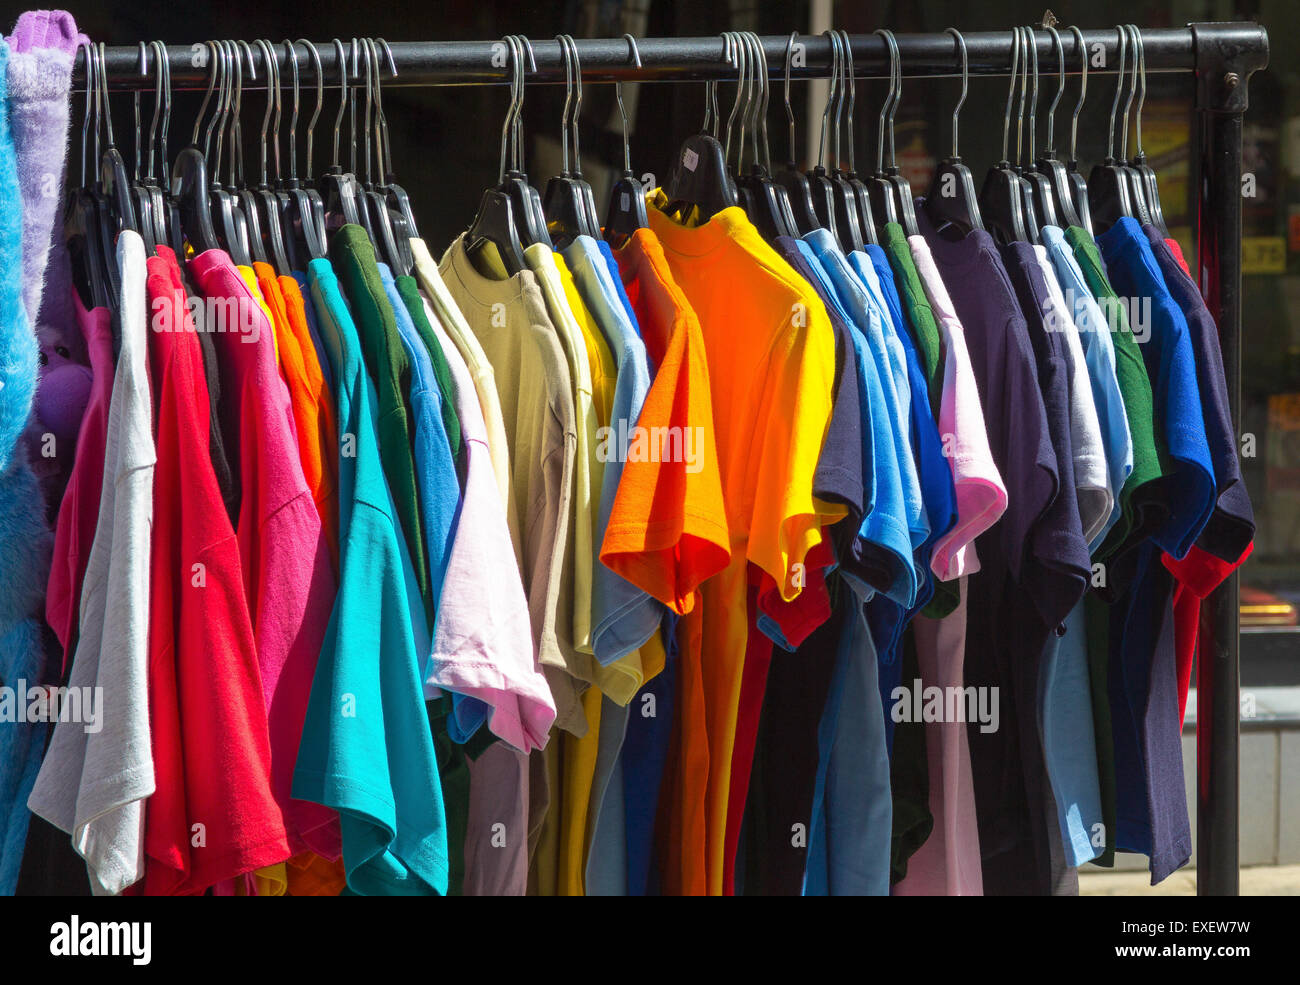 Many summer dresses in various colors Stock Photo